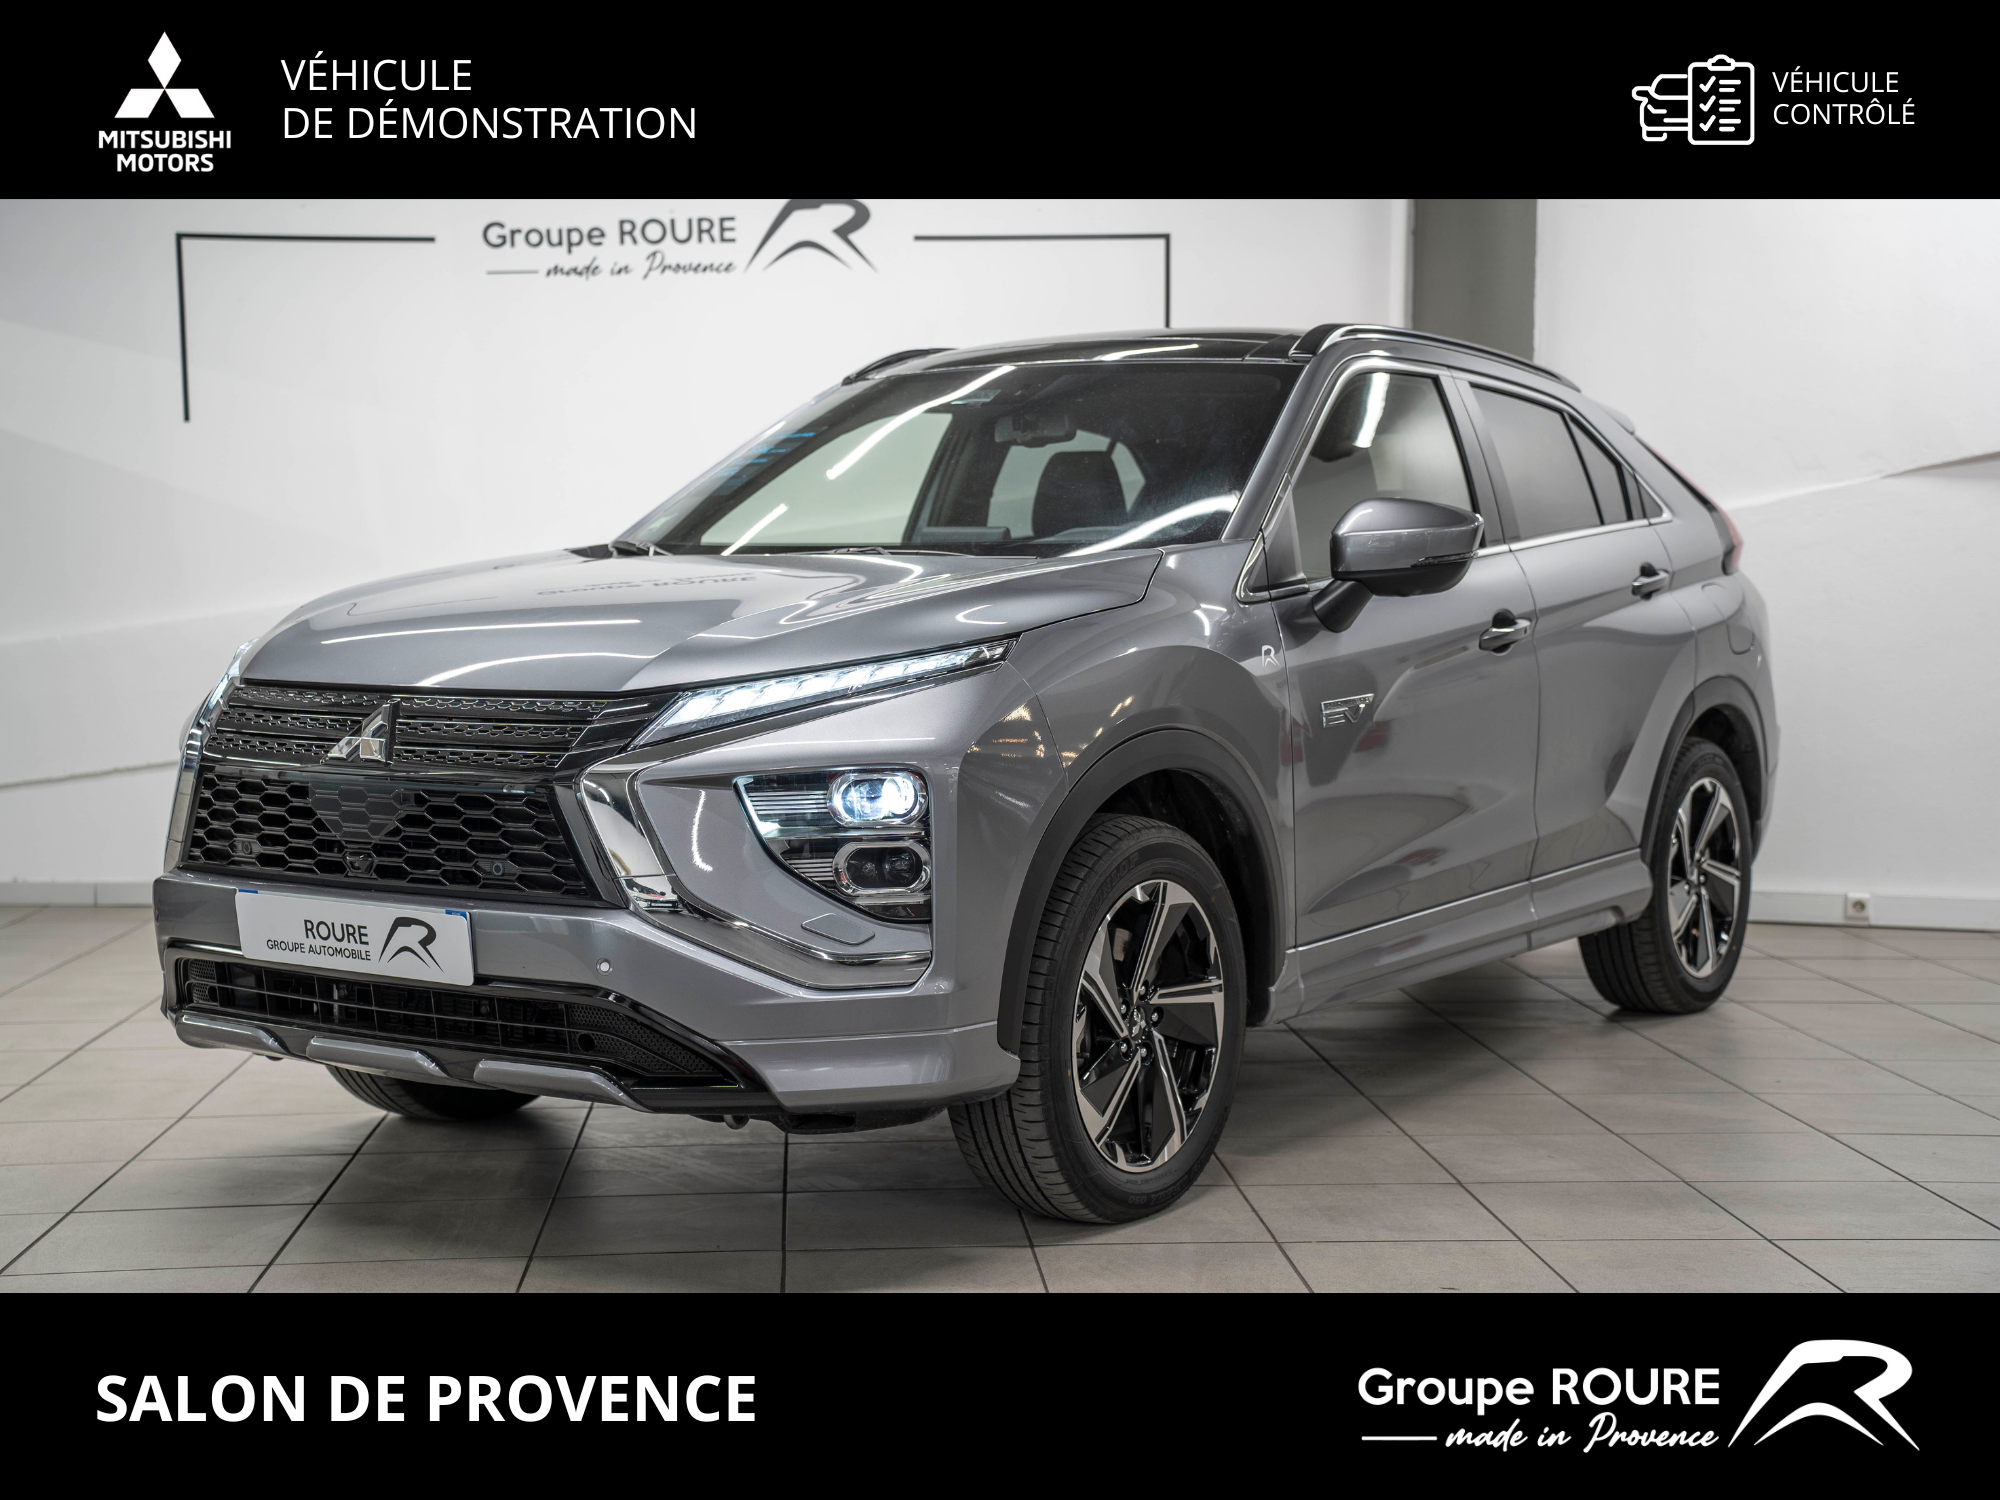 MITSUBISHI-ECLIPSE CROSS-Eclipse Cross 2.4 MIVEC PHEV Twin Motor 4WD-Instyle-36990-6956-roure-automobiles